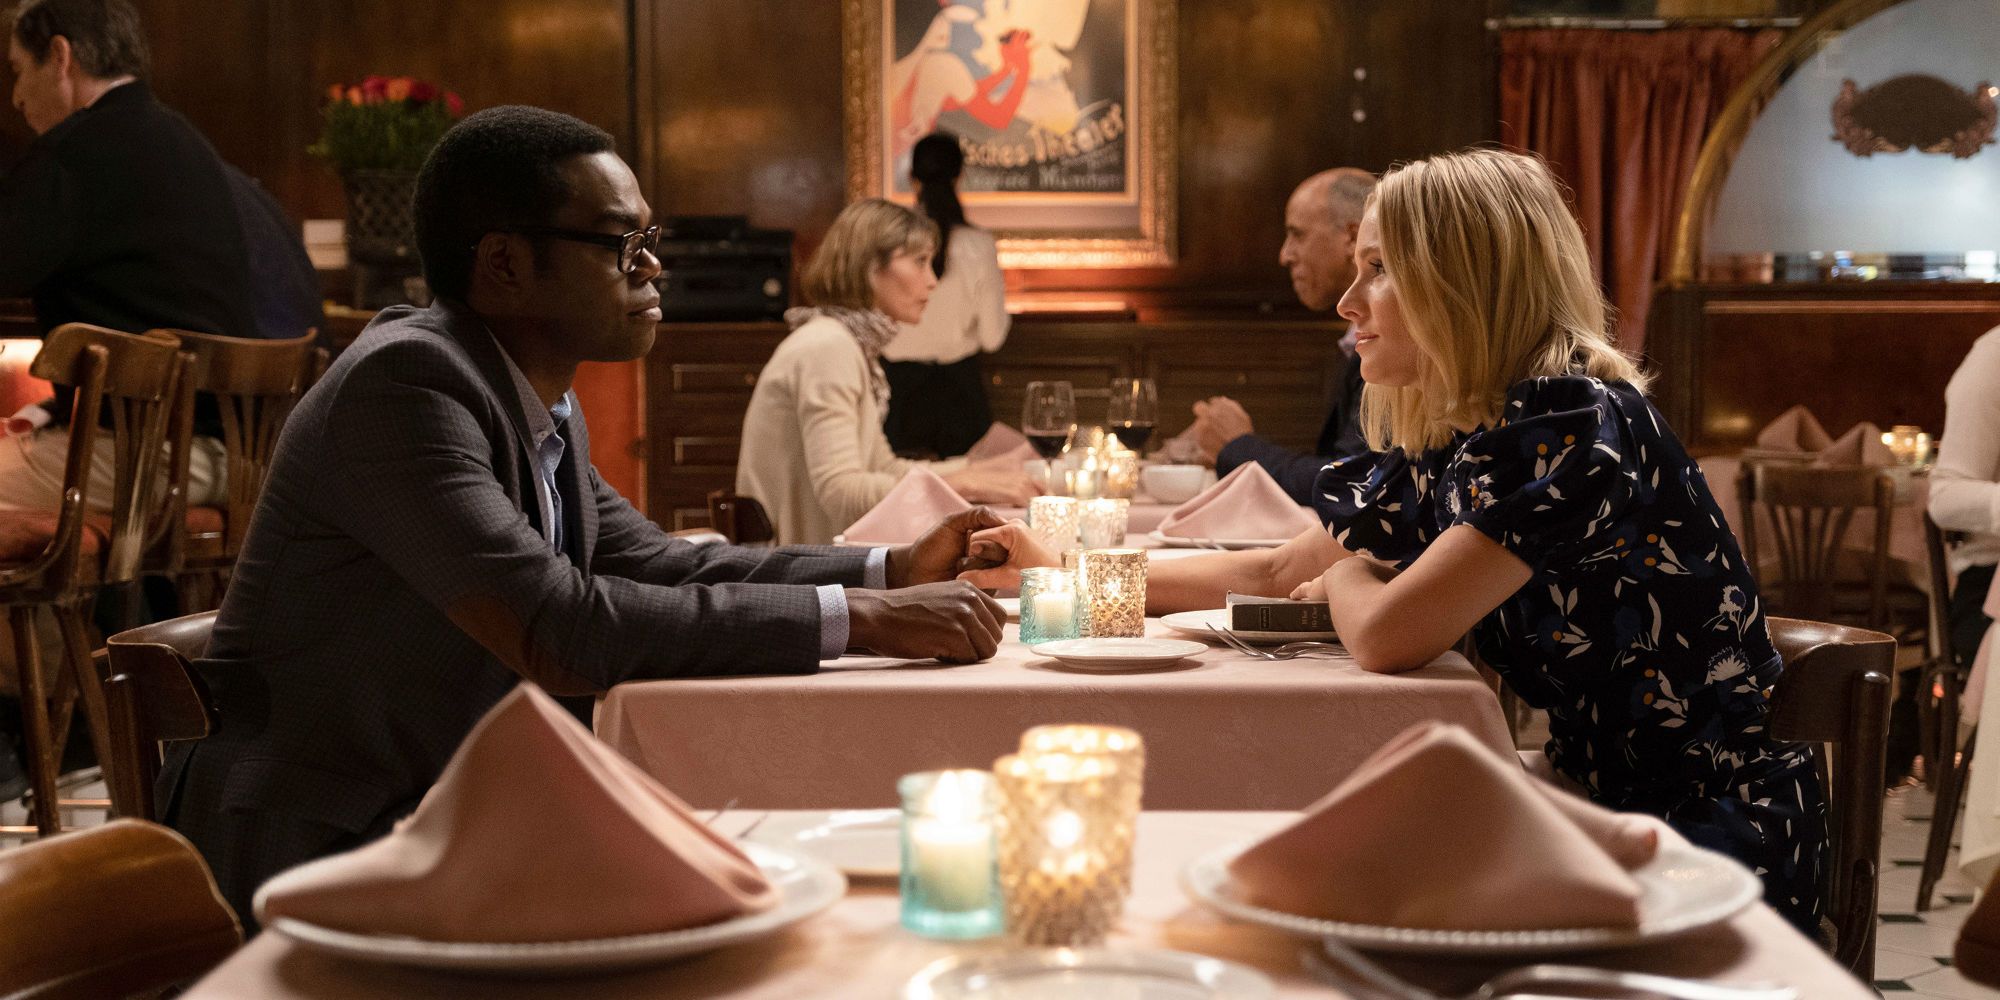 The Good Place Season 4 Ending Eleanor and Chidi